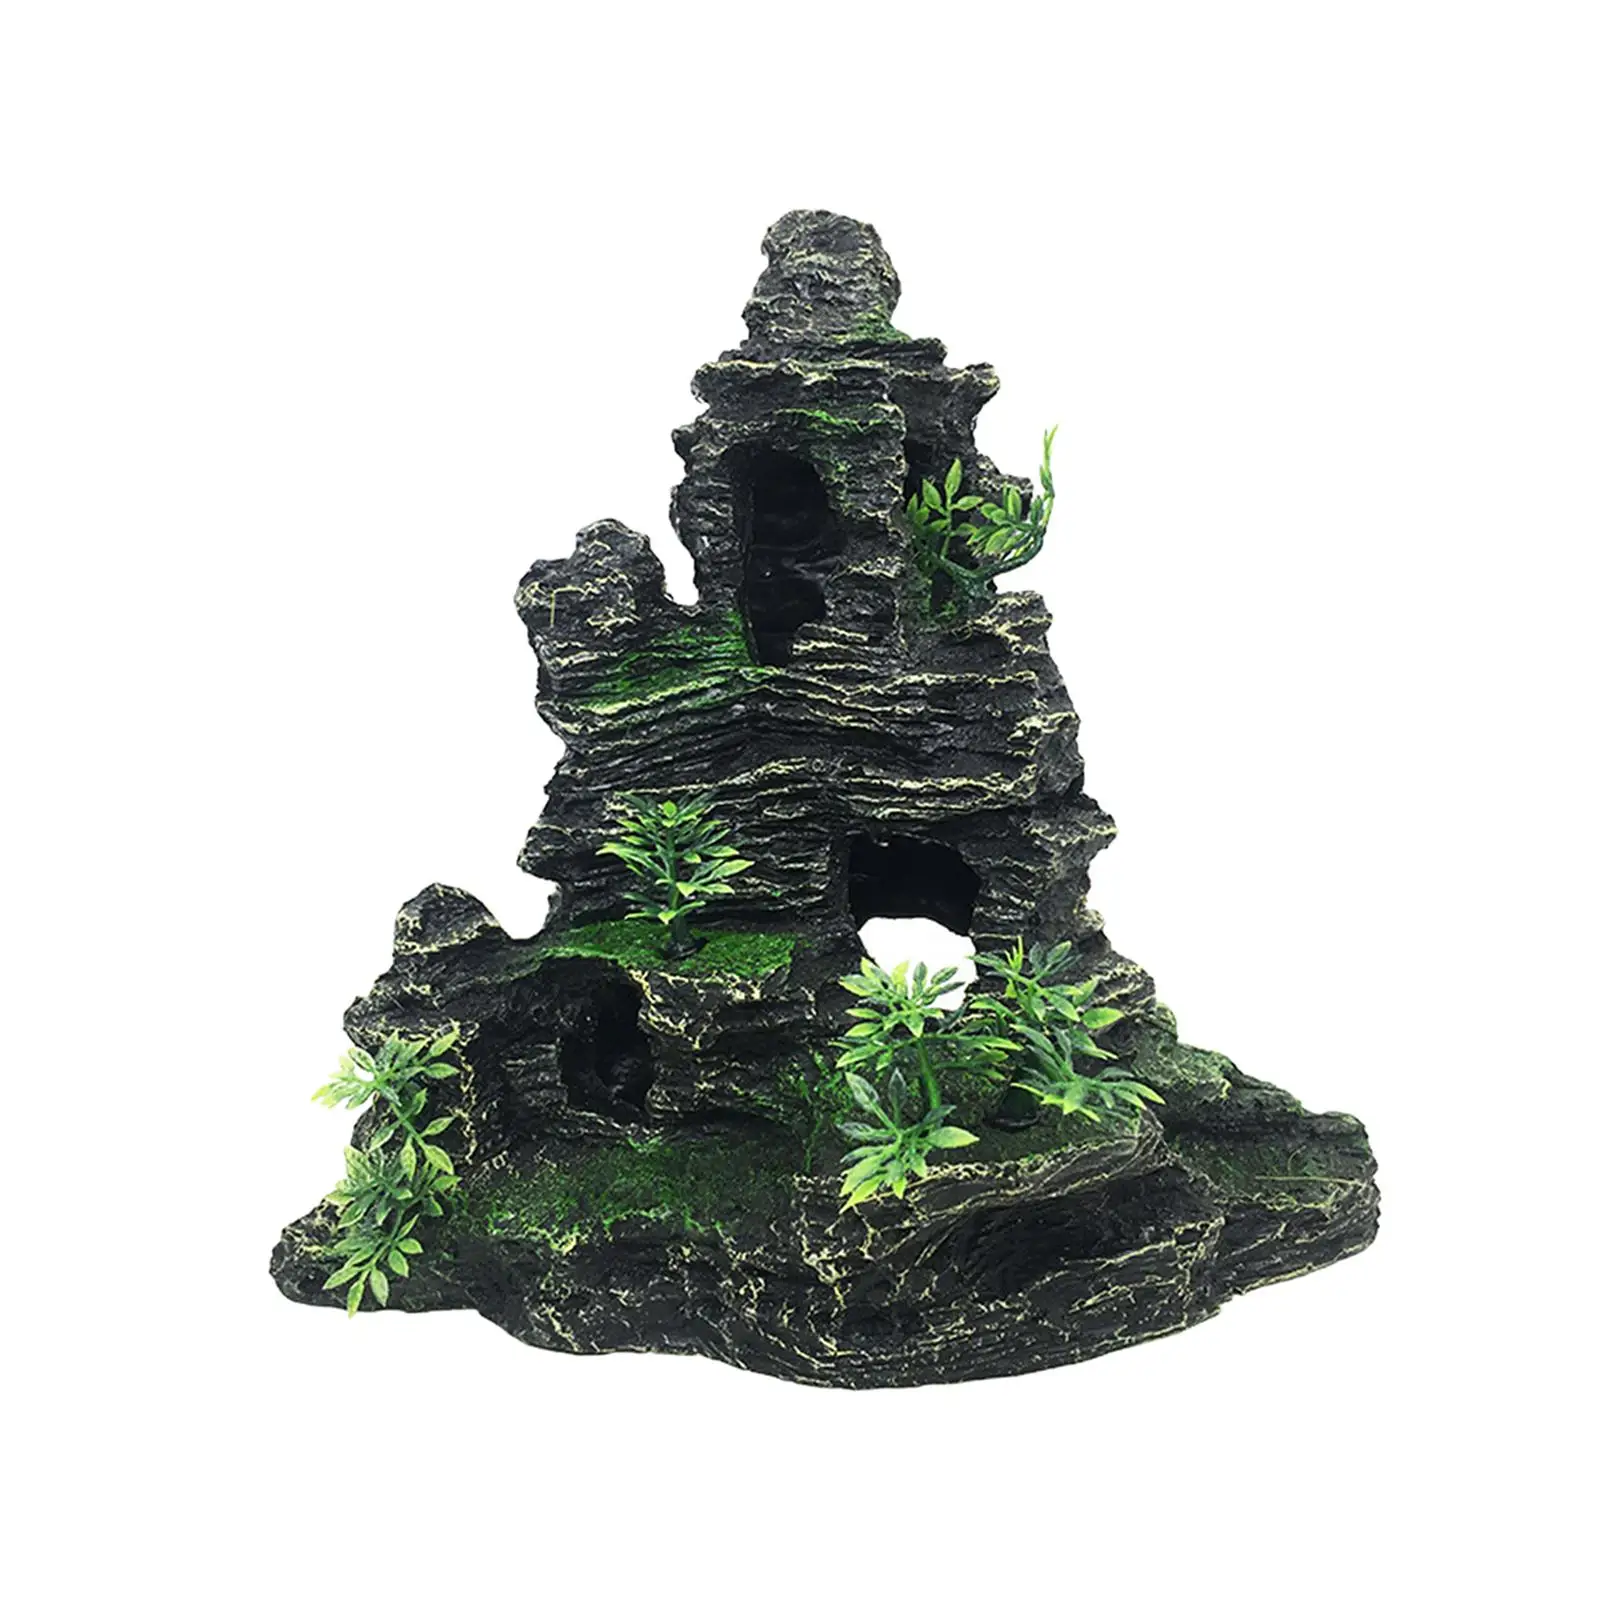 Aquarium Ornament Decorations Resin Small Crafts Accessories Creative Hideaway Fish Tank Landscaping Mountain View Hiding Cave